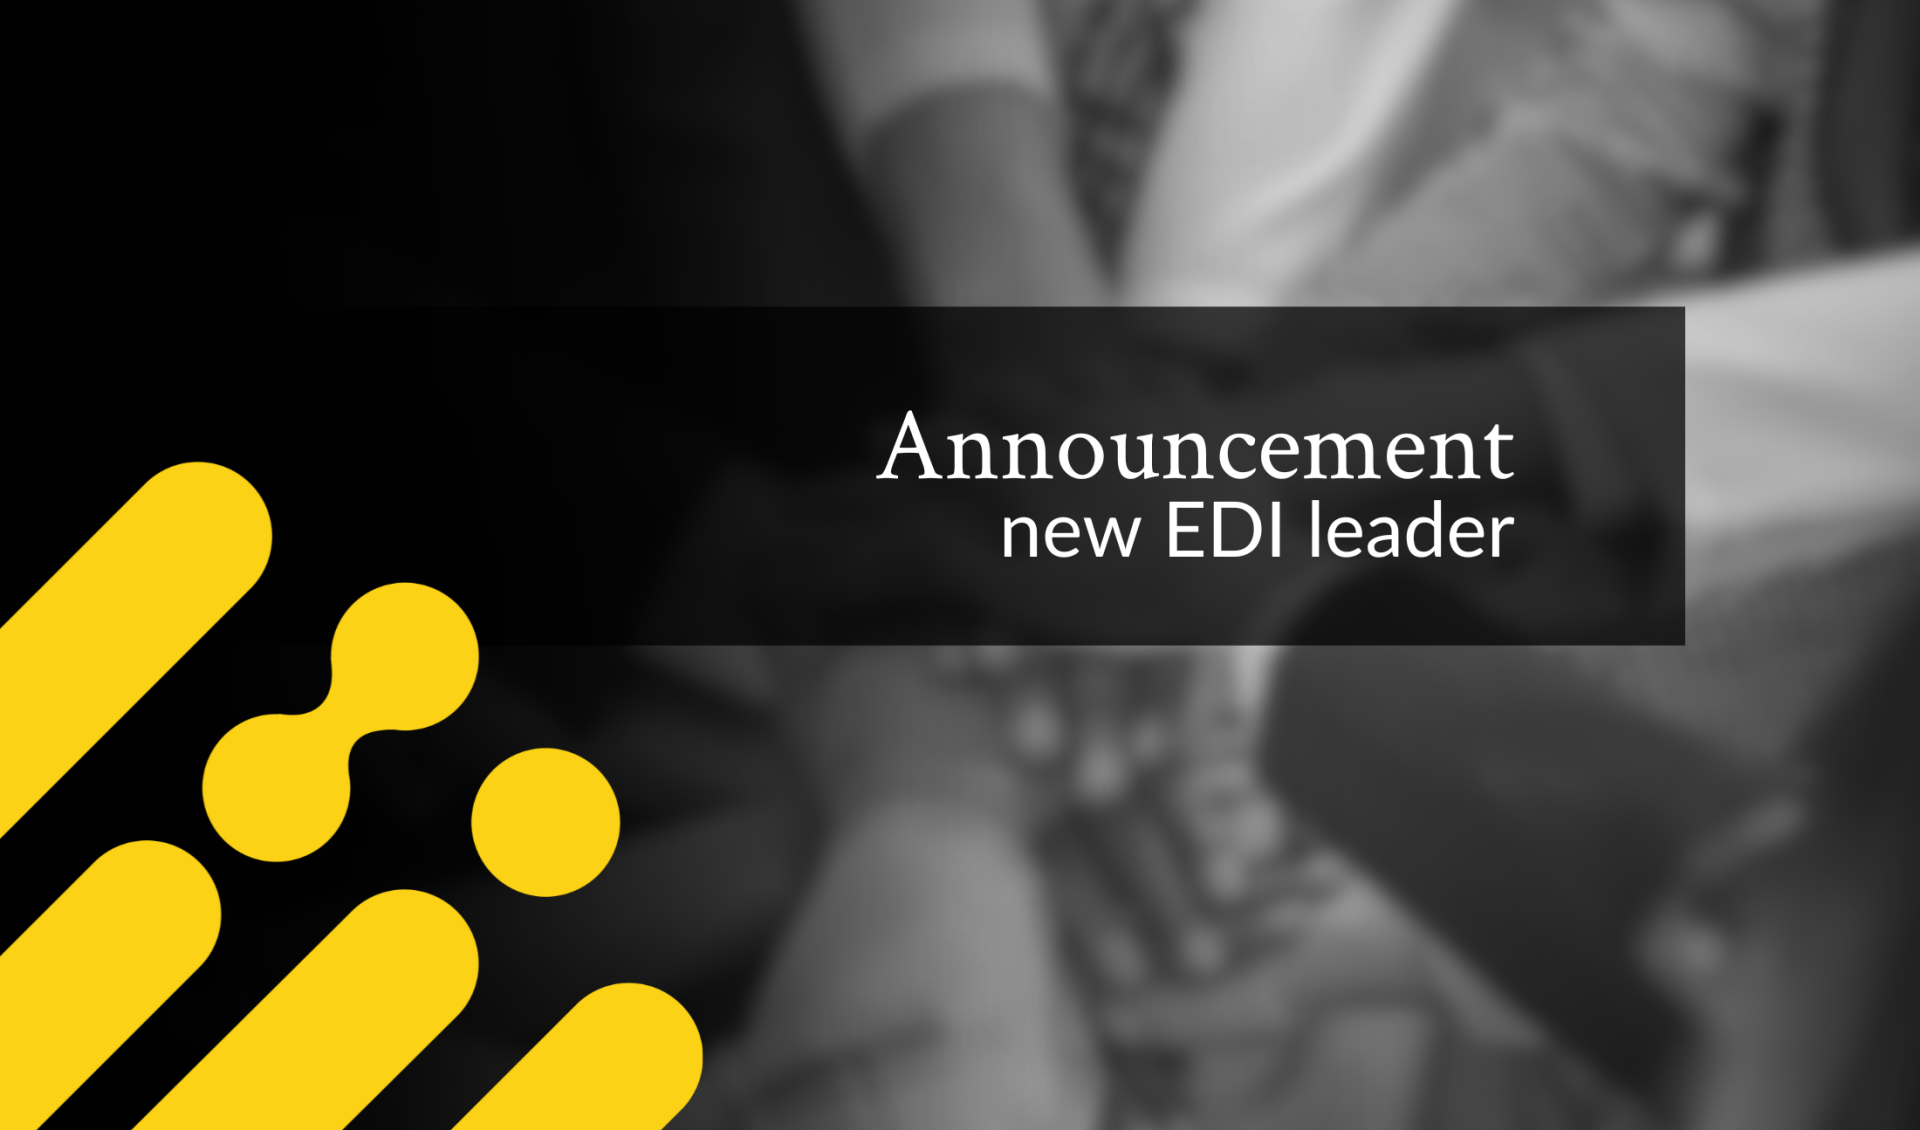 Nadia Ferrah appointed Leader of Equity, Diversity, and Inclusion (EDI)